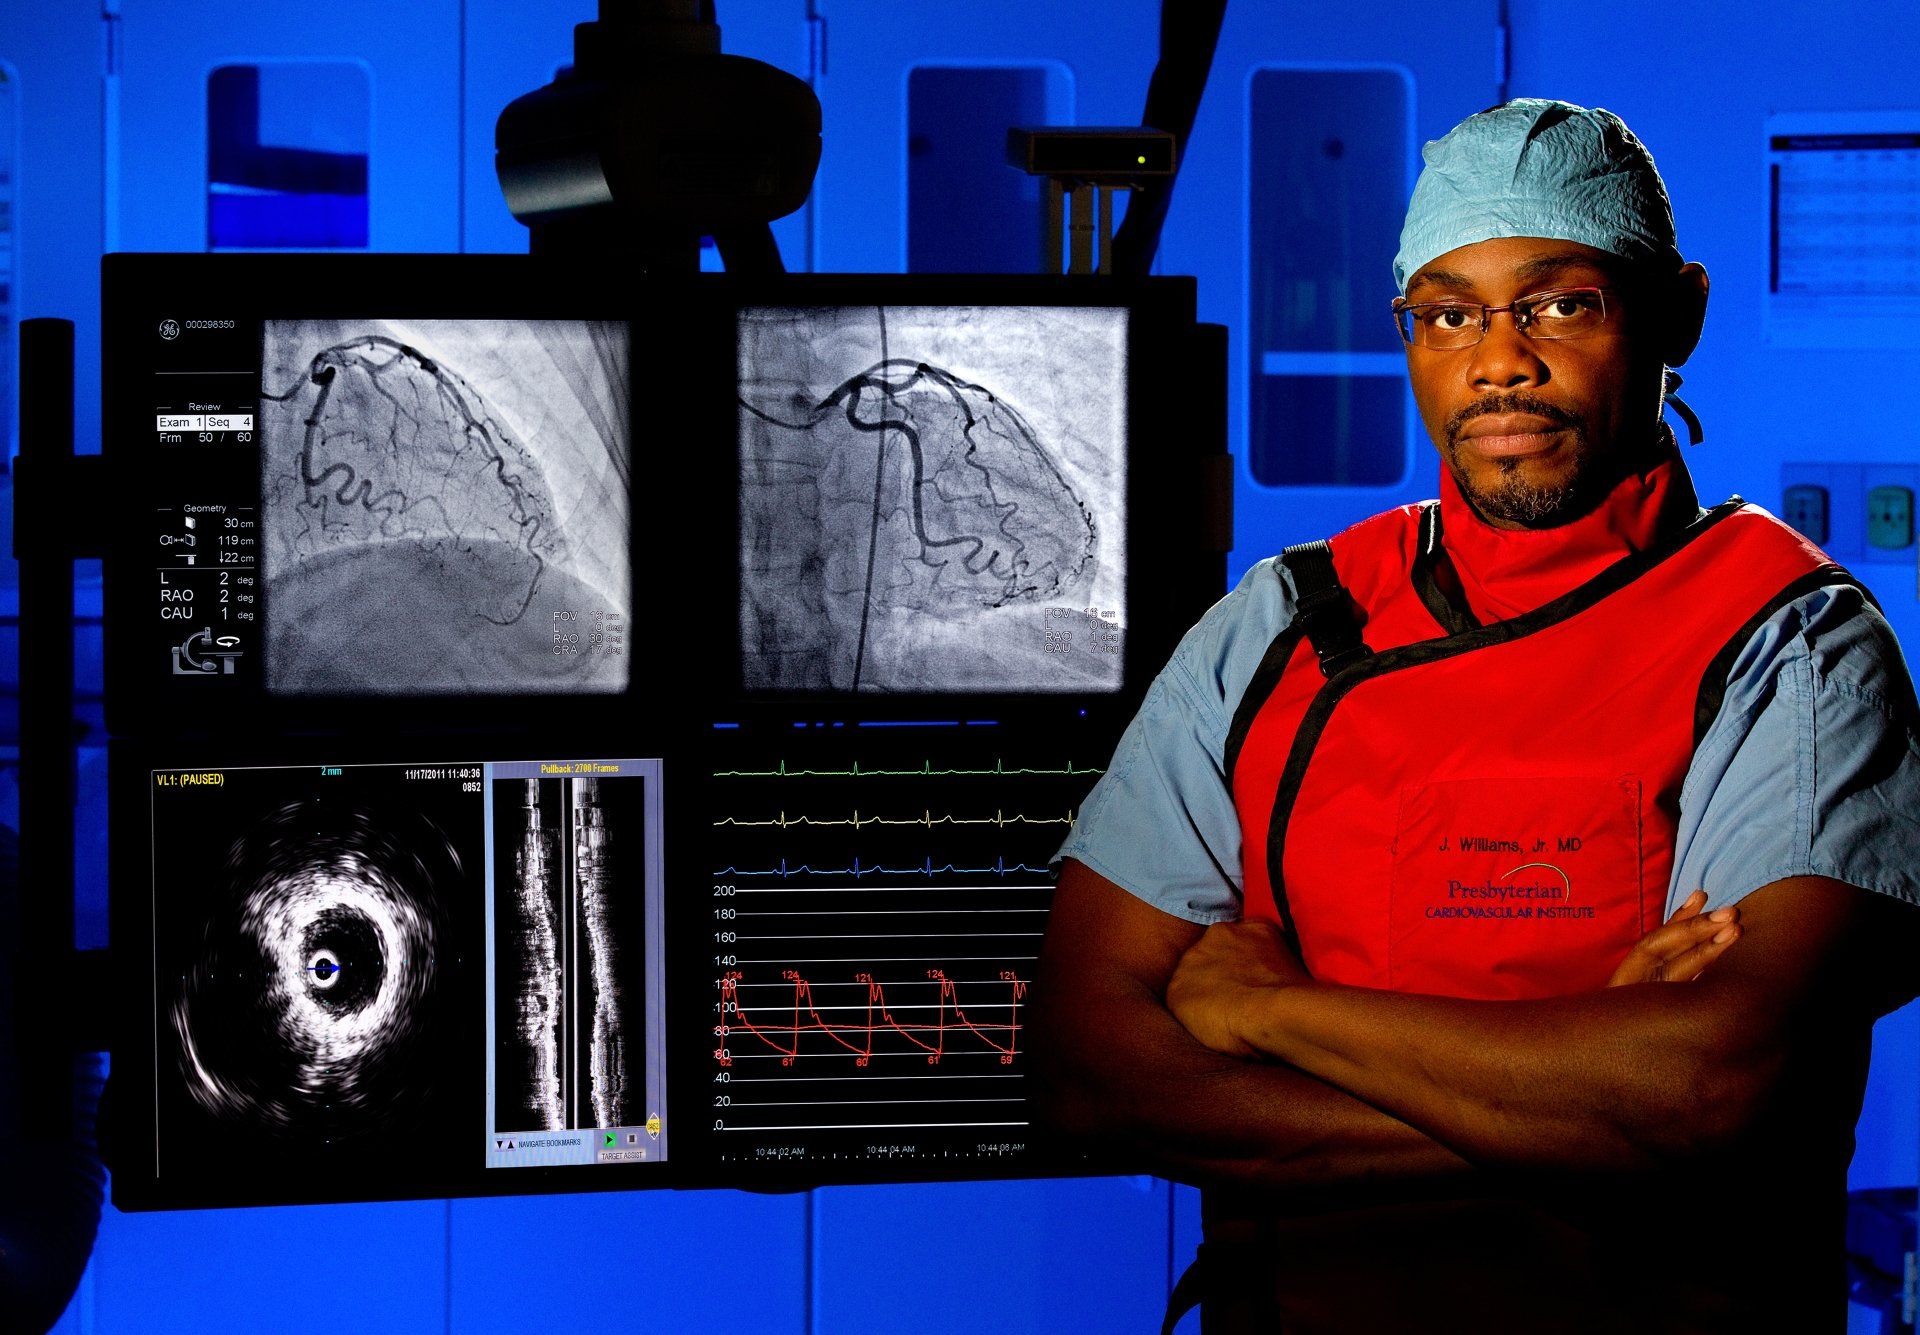 Portrait of doctor with cardiac imaging displays